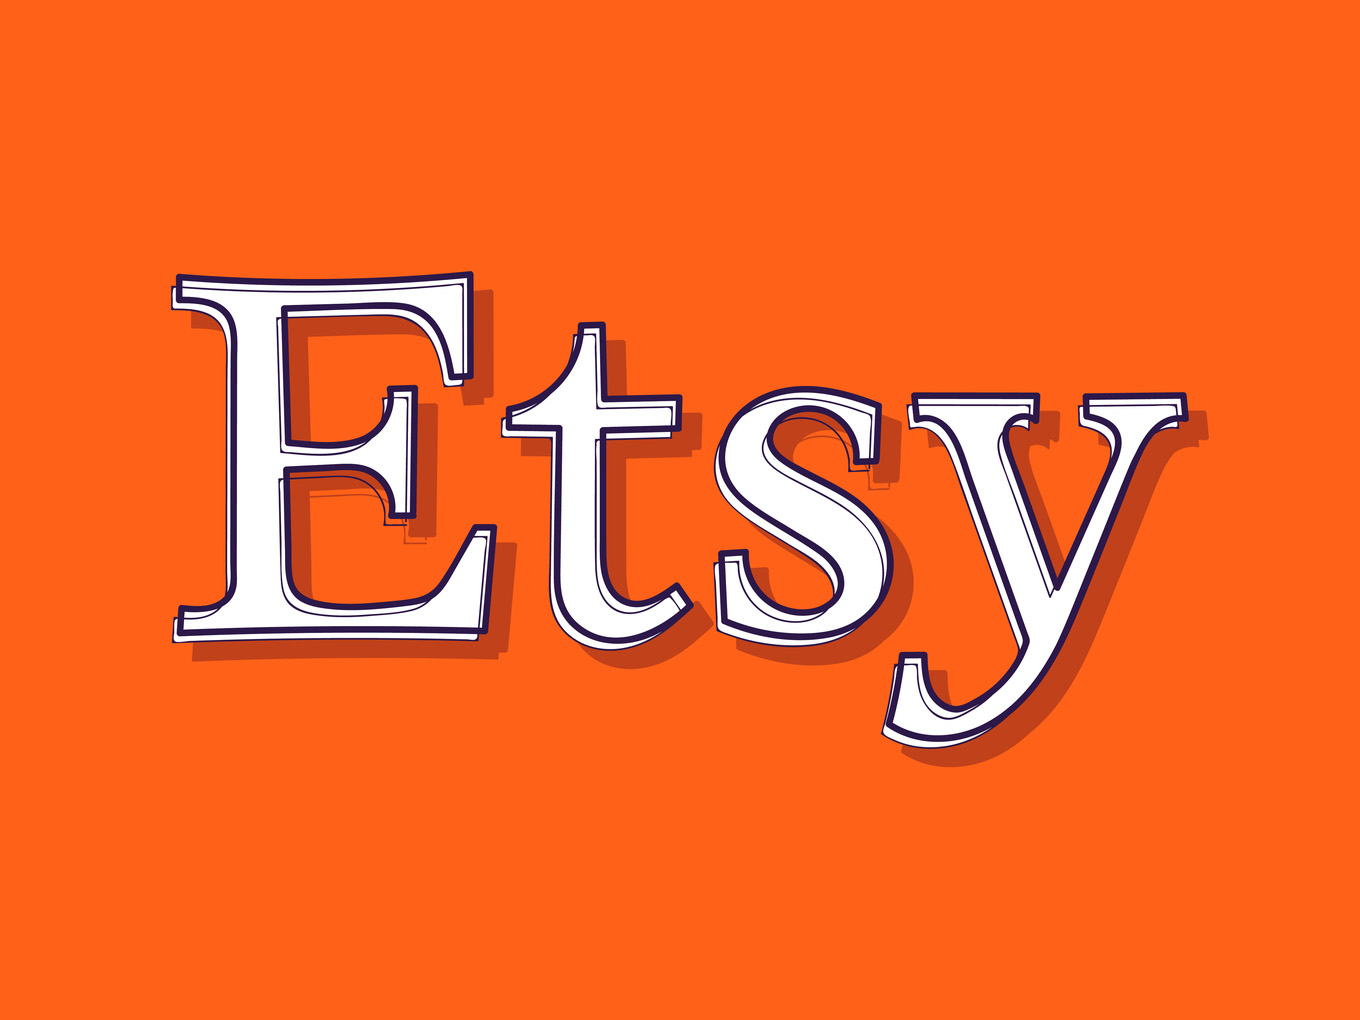 Etsy's Growth Story In India With A Focus On Women Sellers